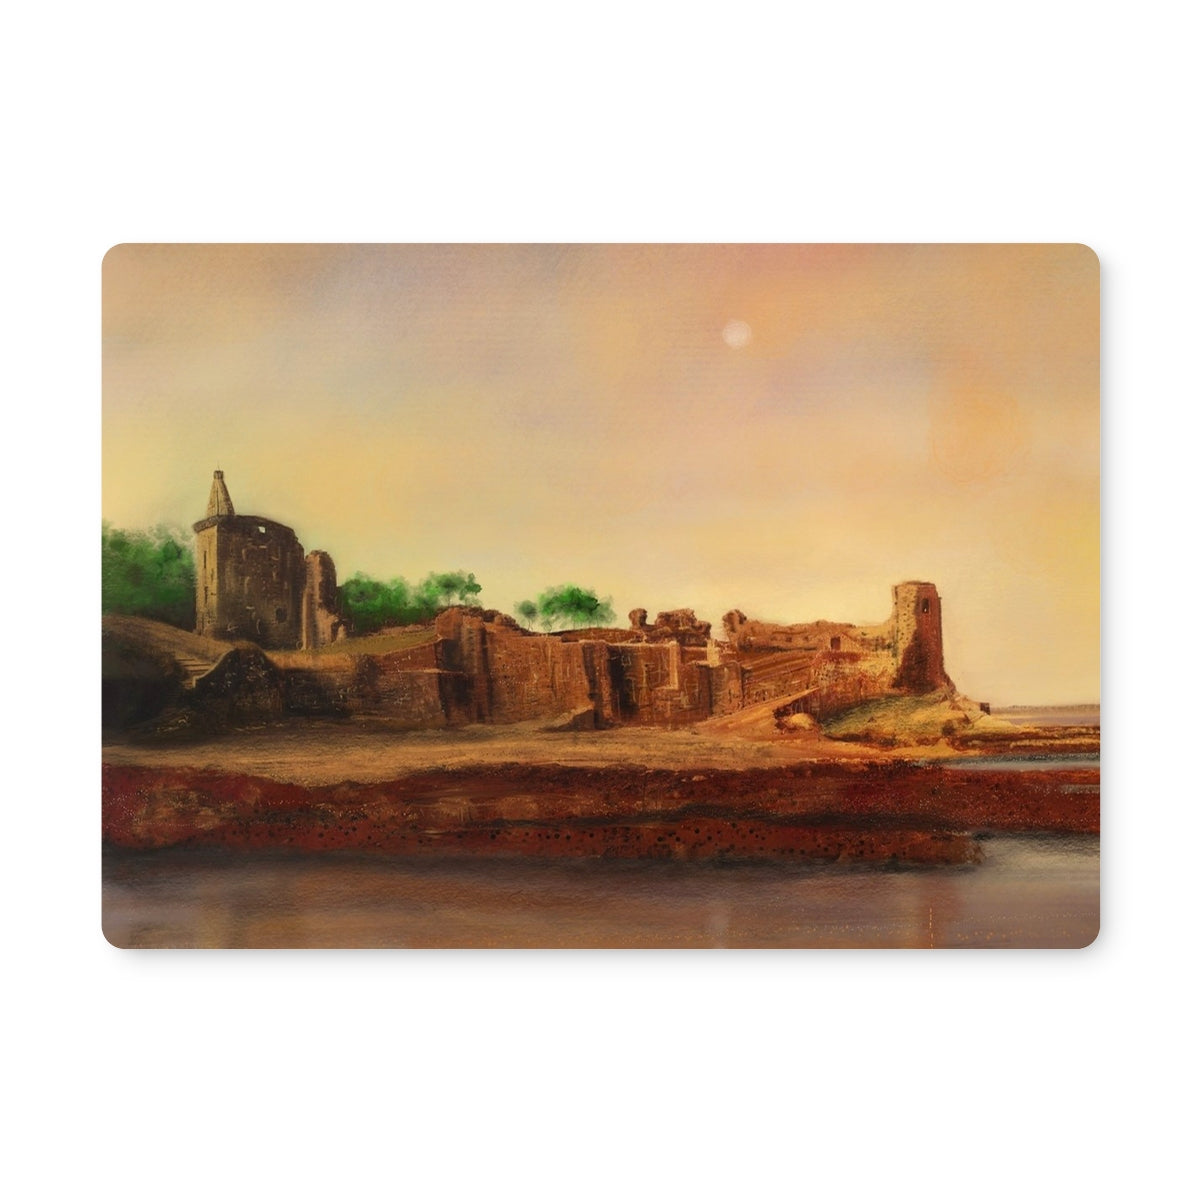 St Andrews Castle Art Gifts Placemat-Placemats-Historic & Iconic Scotland Art Gallery-6 Placemats-Paintings, Prints, Homeware, Art Gifts From Scotland By Scottish Artist Kevin Hunter